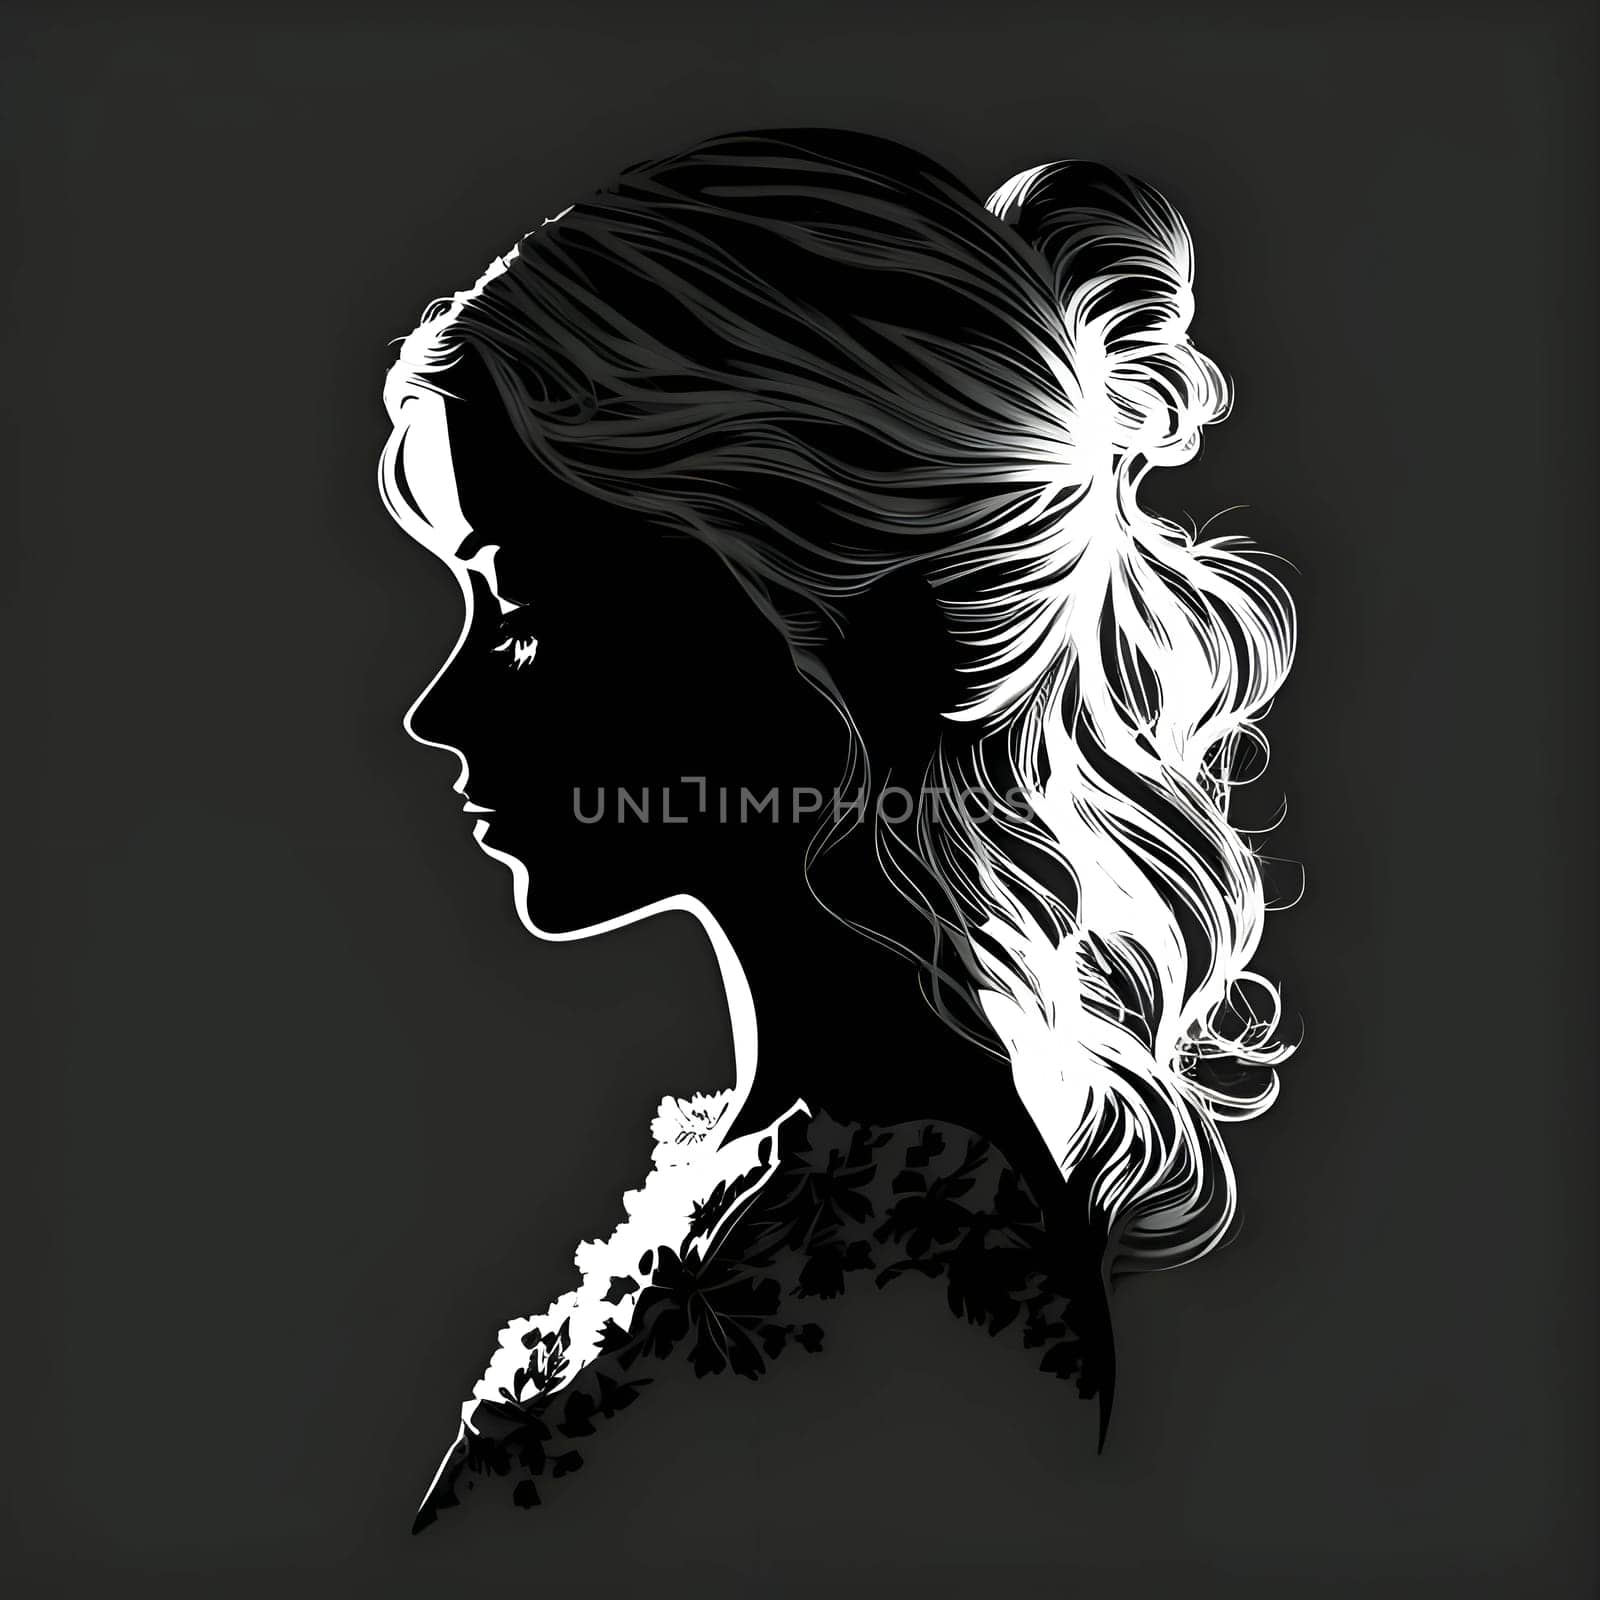 Black silhouette of portrait of a woman on white background. by ThemesS